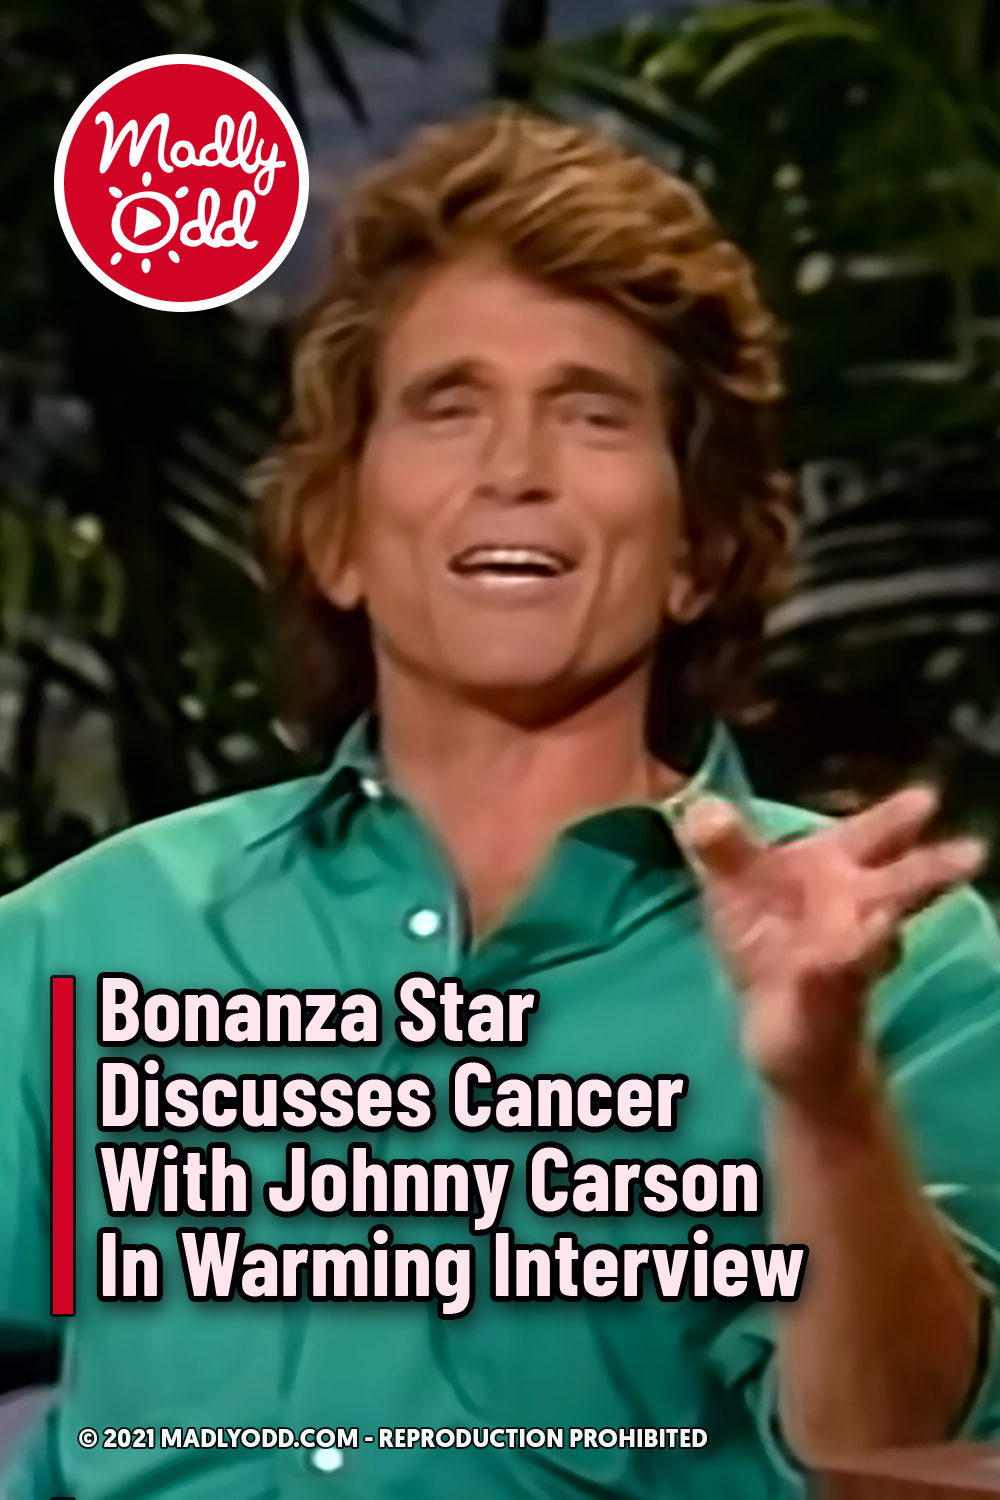 Bonanza Star Discusses Cancer With Johnny Carson In Warming Interview